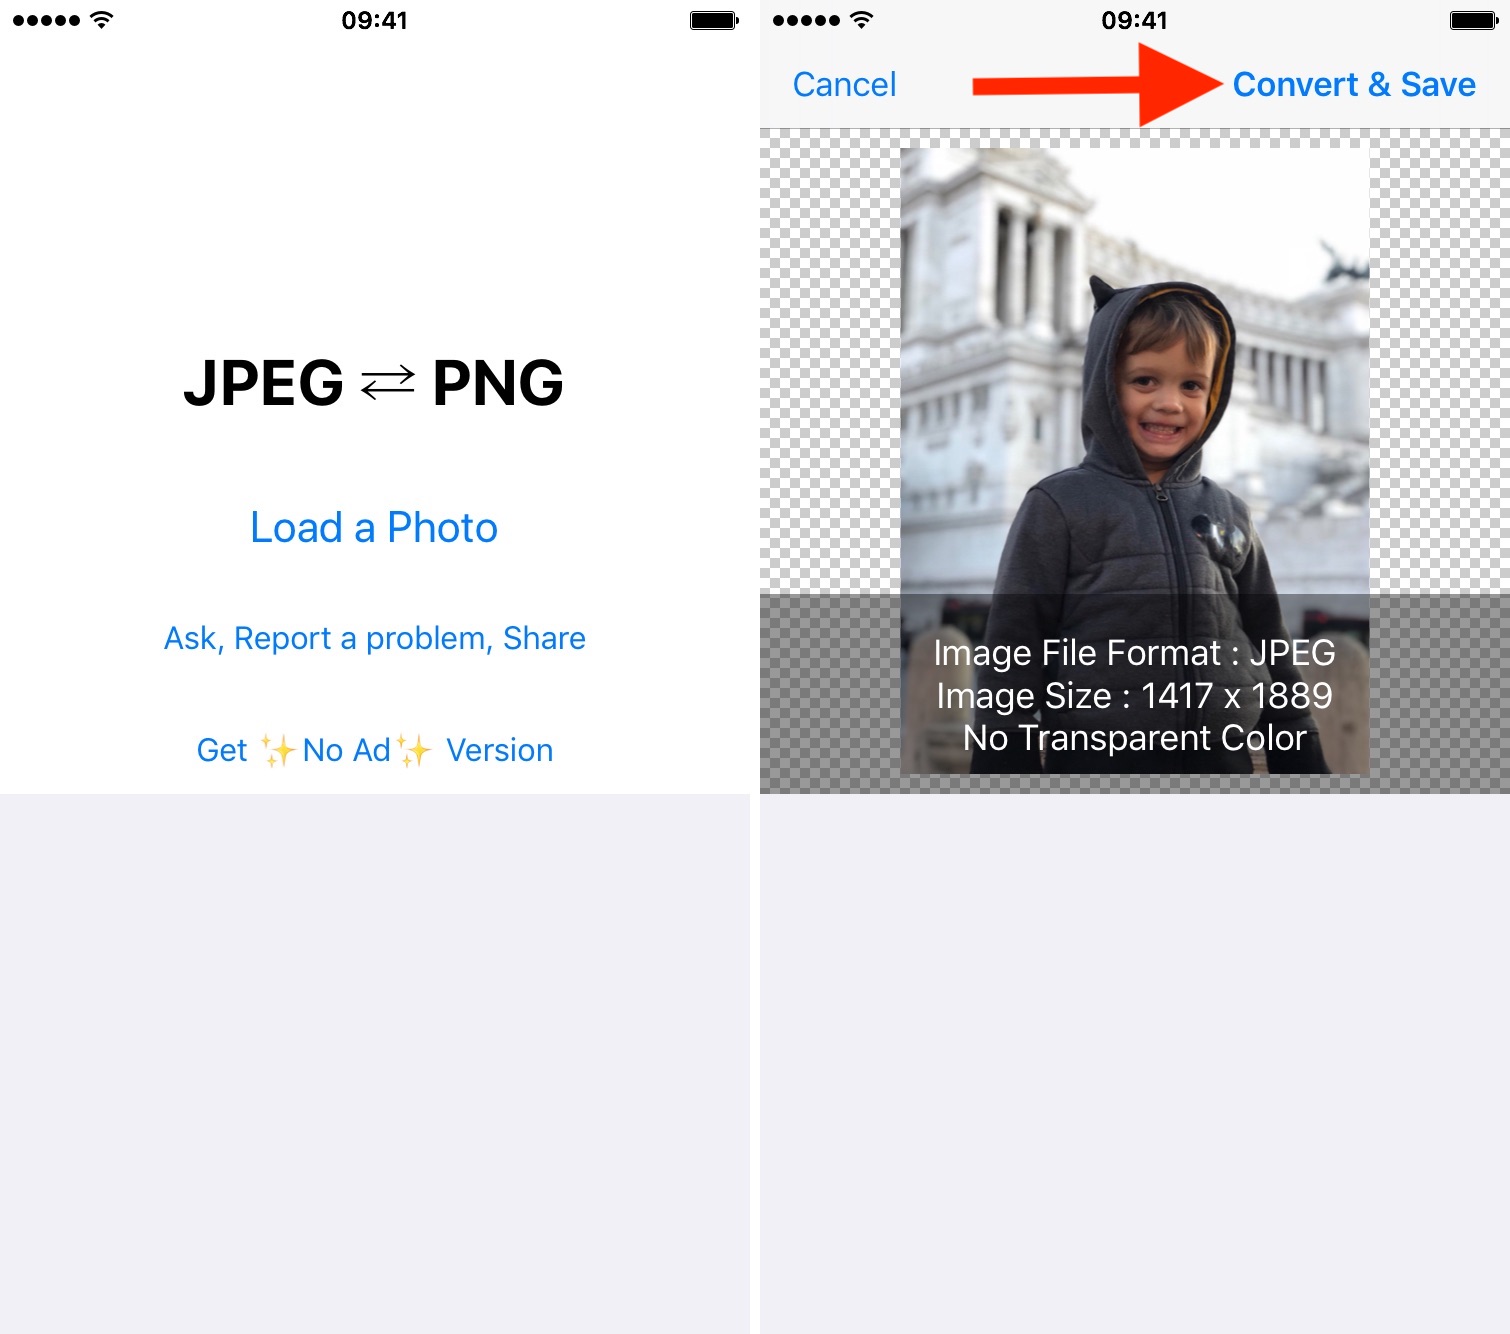 How to convert various image file types to JPG or PNG on iPhone or iPad.